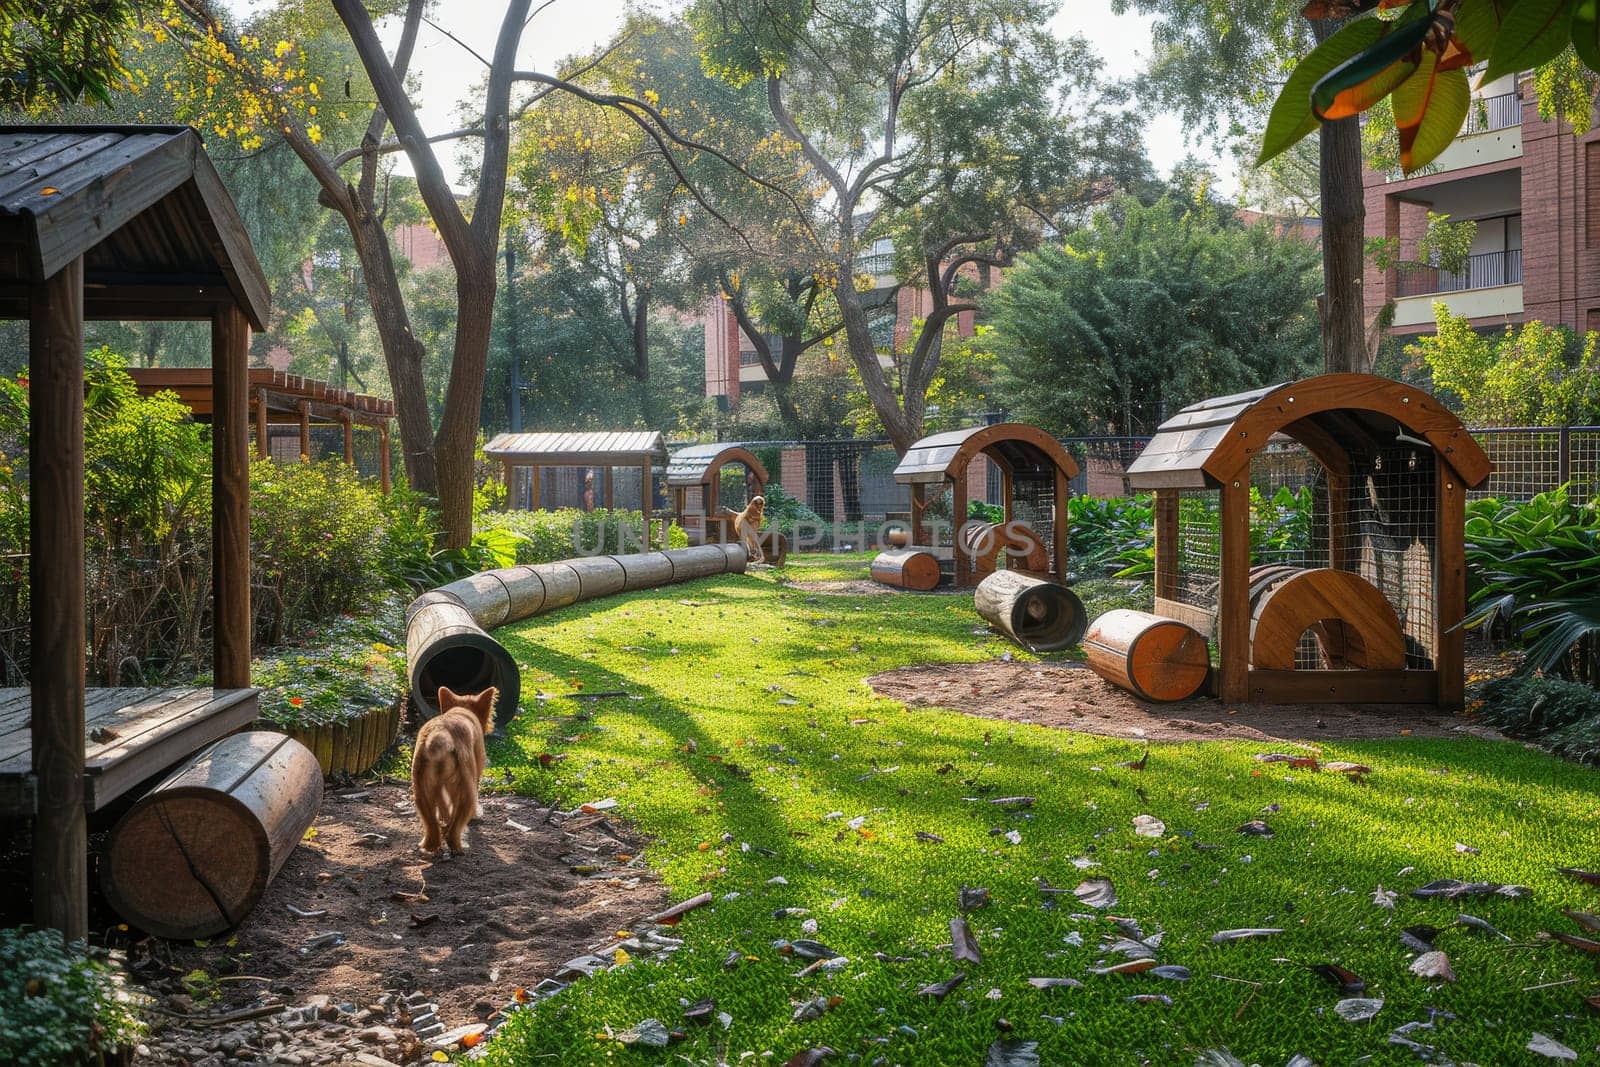 A dog park with a wooden gazebo and a tree with a large banana leaf. There are several dogs playing in the yard